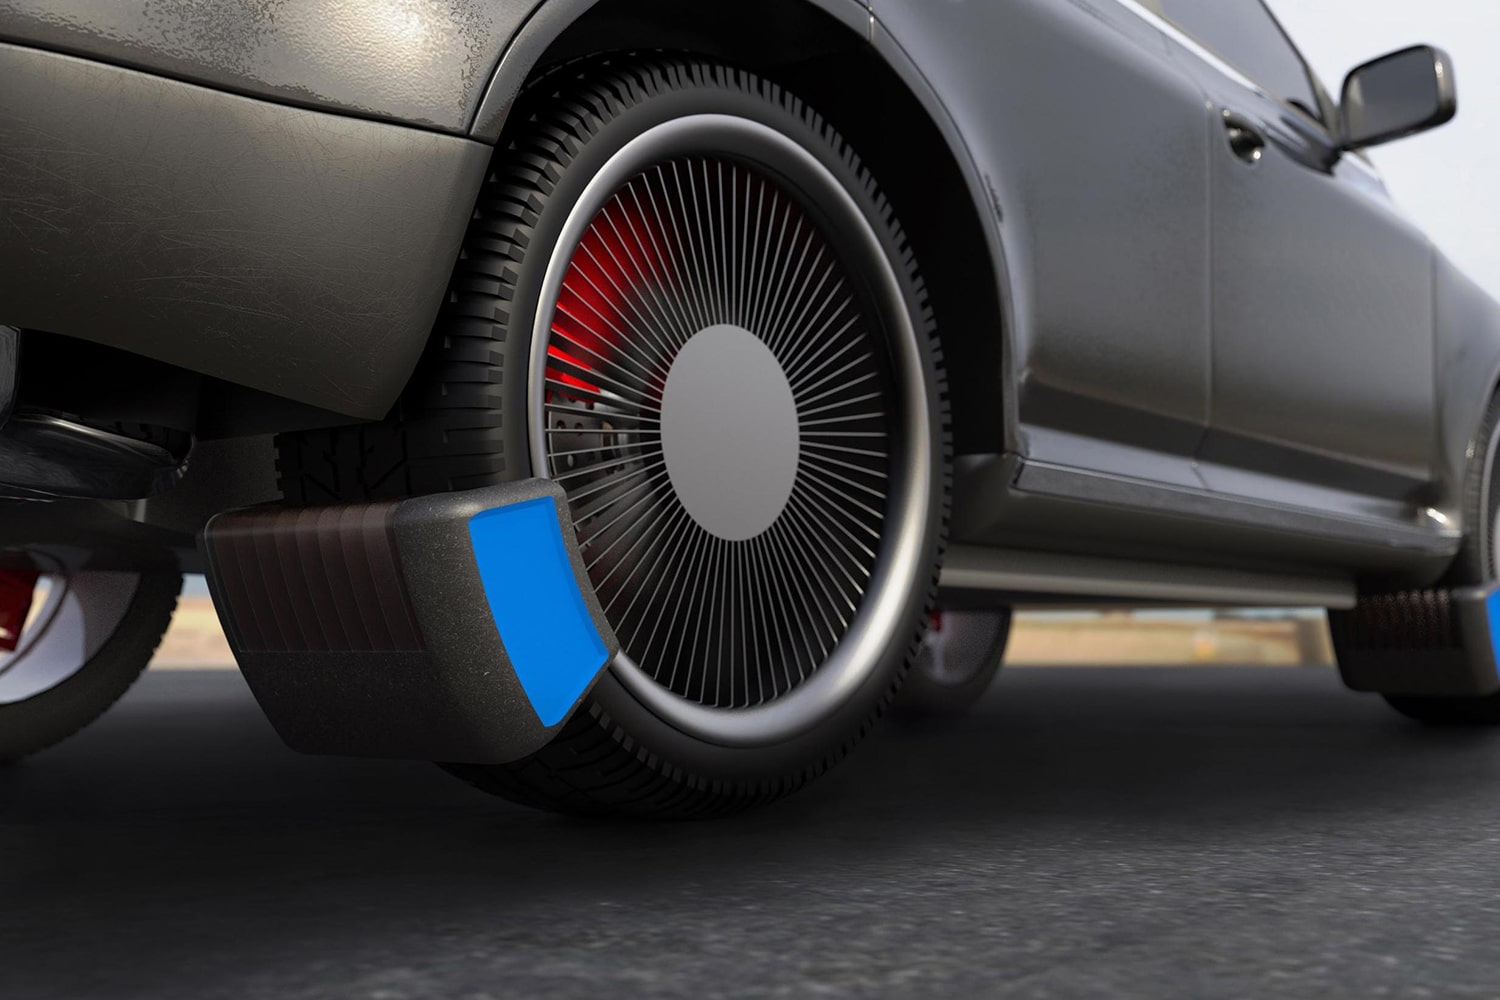 Prototype device traps harmful microplastics from your tires while driving.